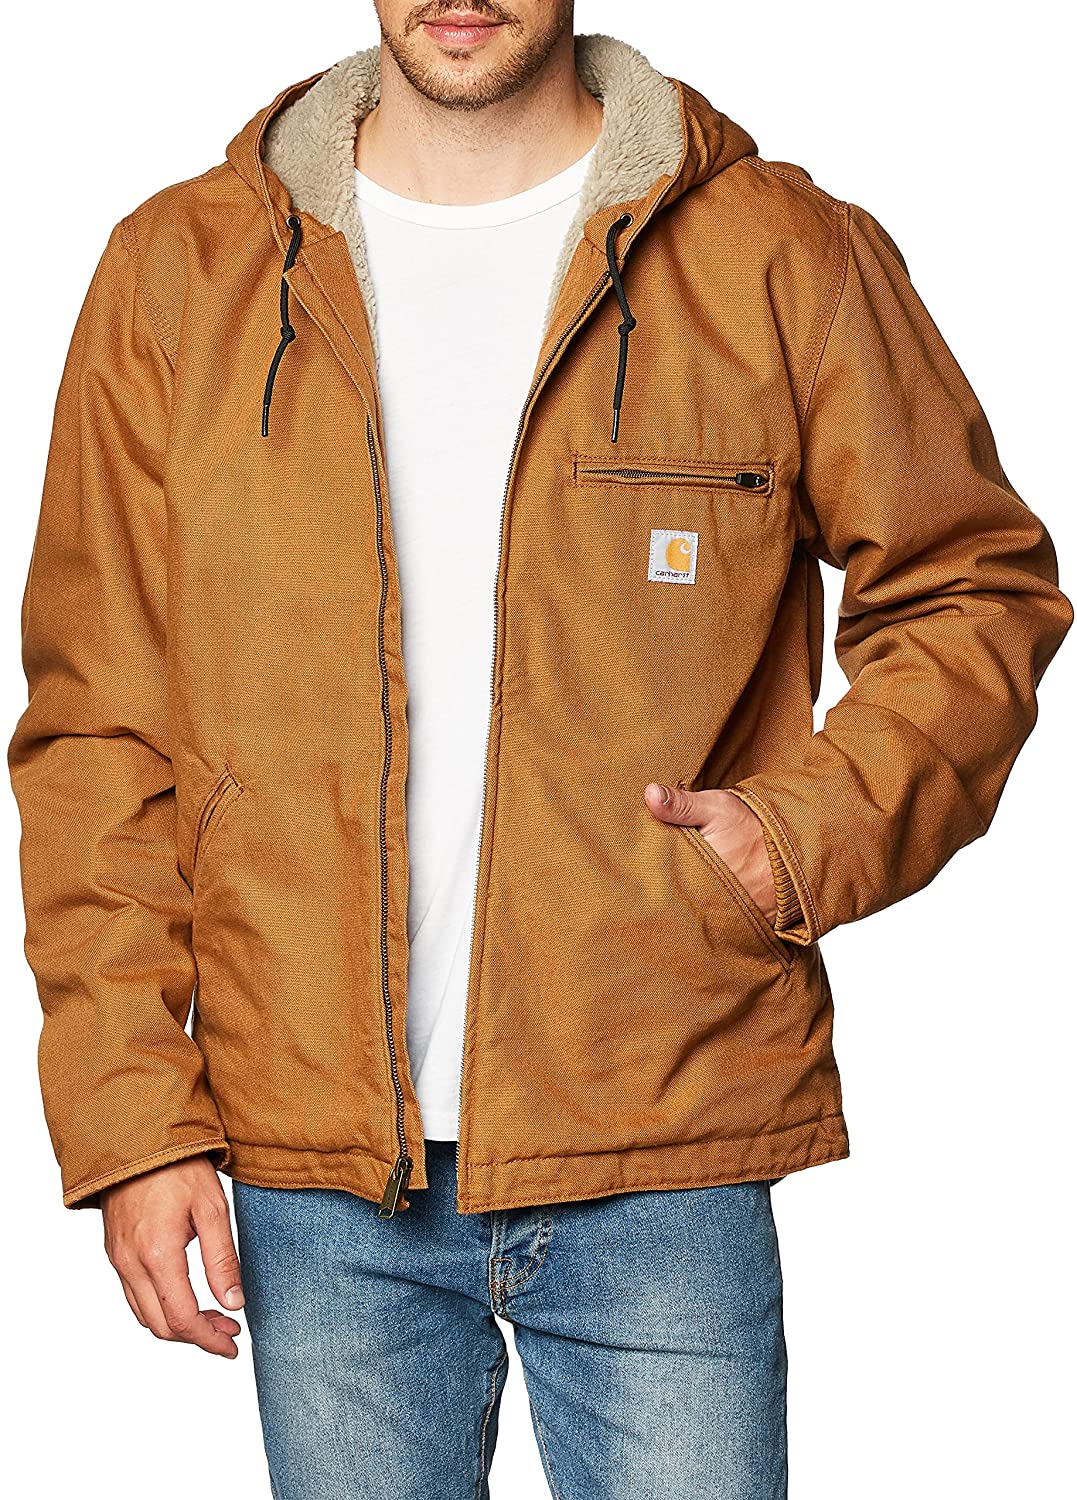 Carhartt Men's Relaxed Fit Washed Duck Sherpa-Lined Jacket, 60% OFF